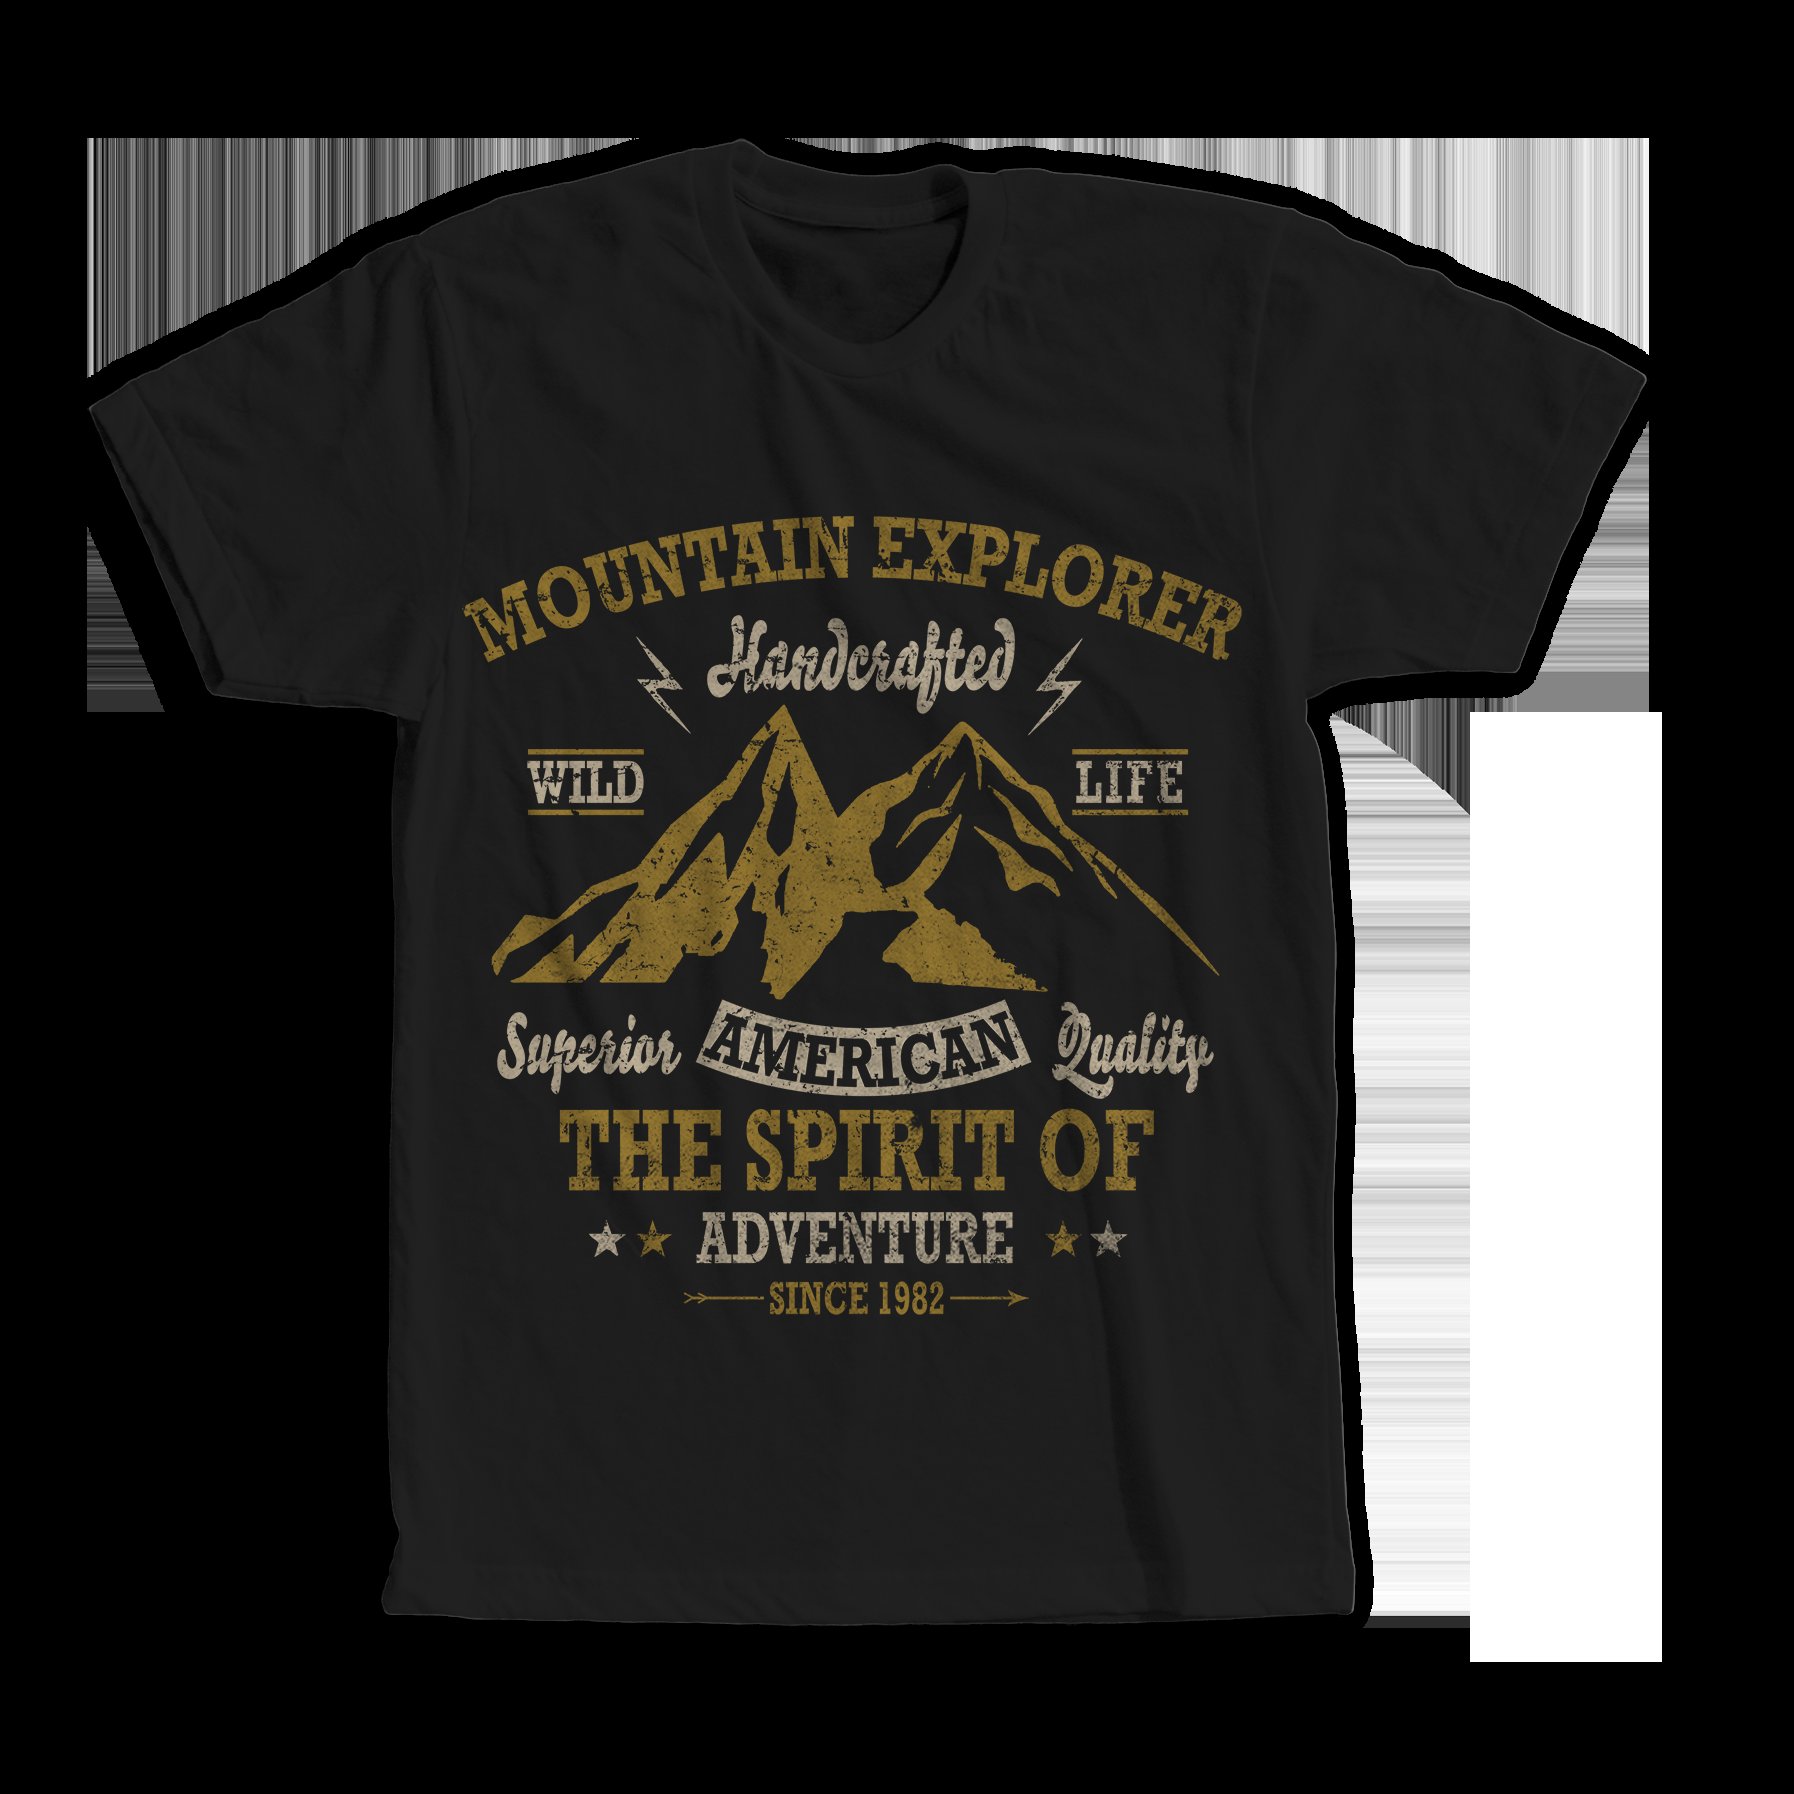 Classic t-shirt with yellow mountains.